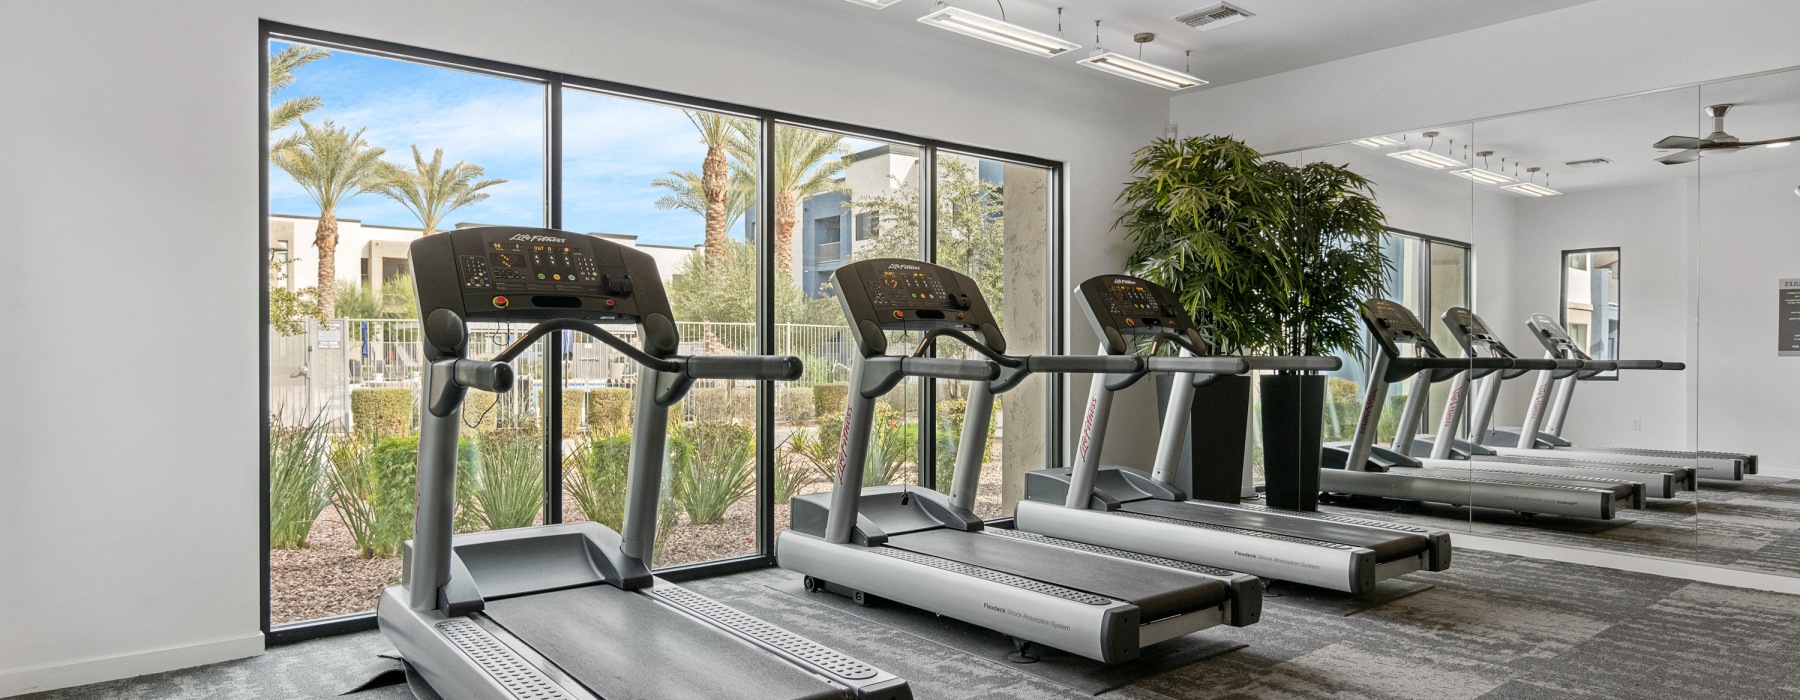 Large Fitness Center Cardio and Weights